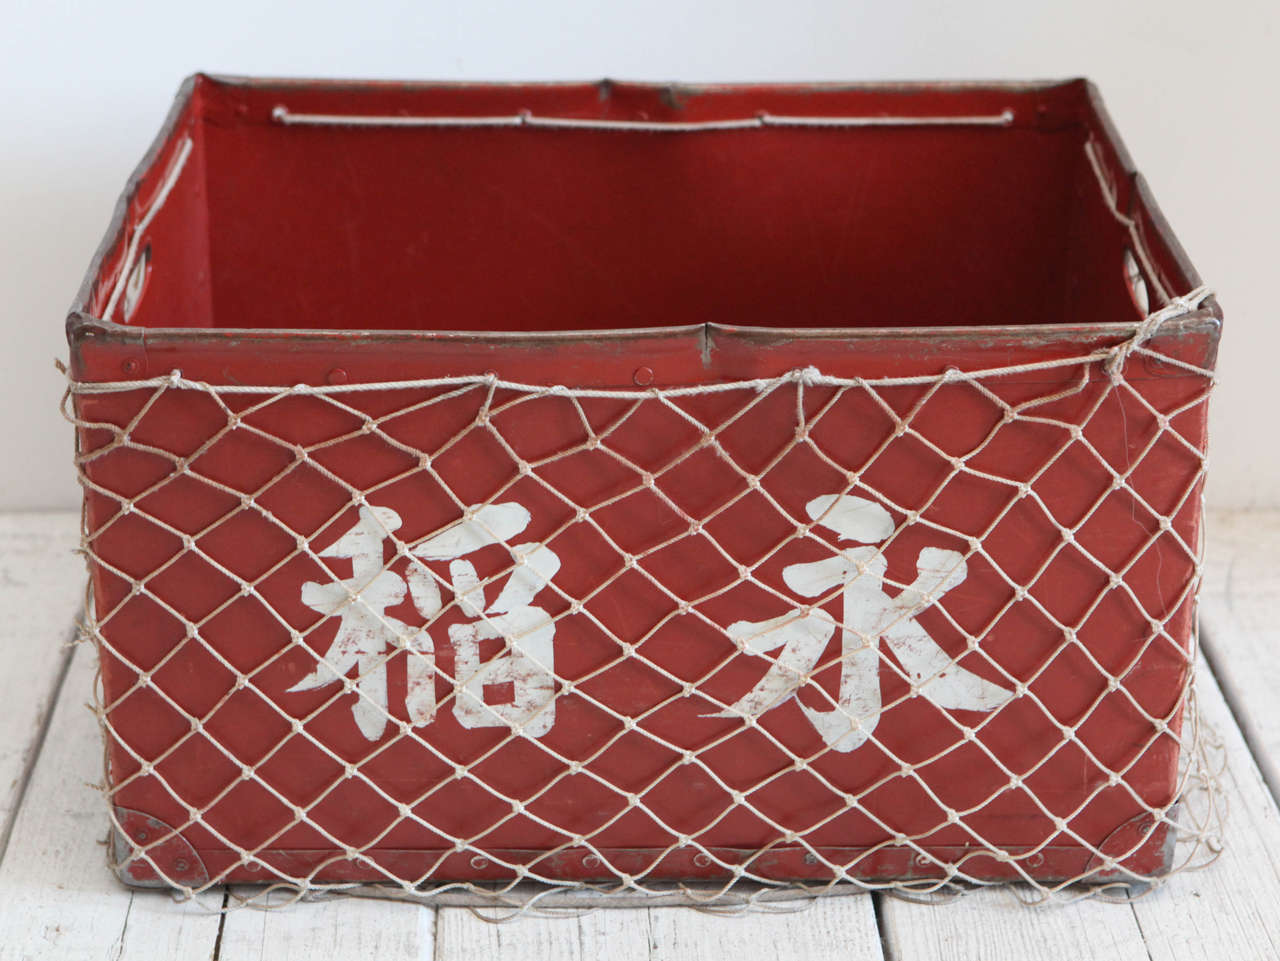 Tin crate with hand knotted fish net or rope for various storage uses.